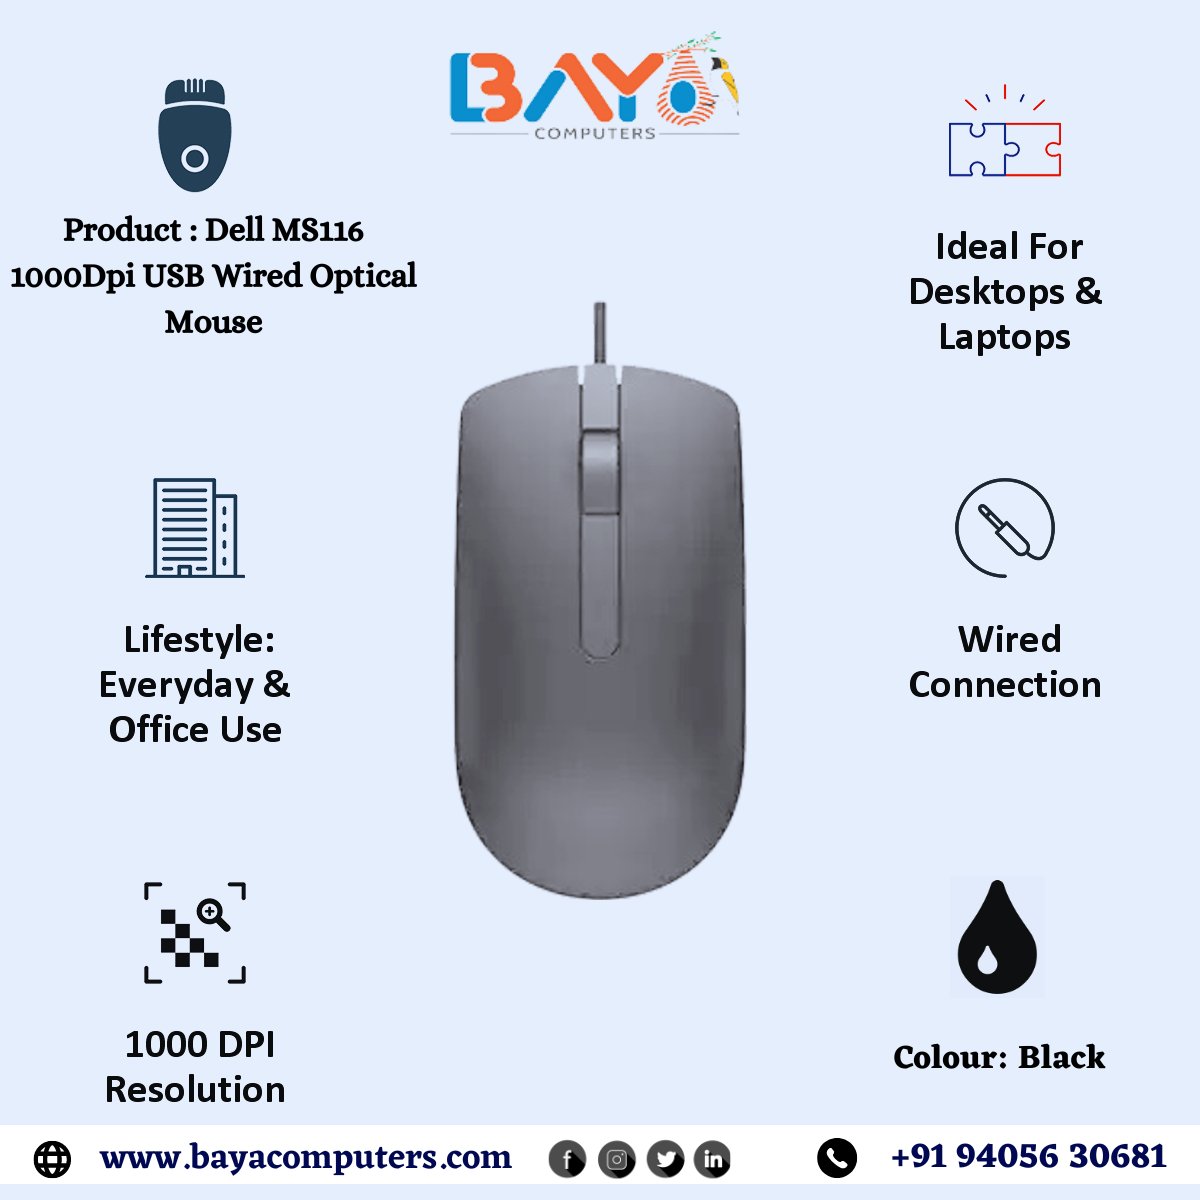 Dell MS116 1000Dpi USB Wired Optical Mouse (Black)
.
Contact Us : +91 94056 30681
Visit Us: bayacomputers.com
.
#laptopaccessory #laptop #laptopaccessory #laptopaccessories #dellmouse  #pimpri #pimprichinchwad #laptopaccessories #laptopaccessoriesph #laptopaccessoriesonline